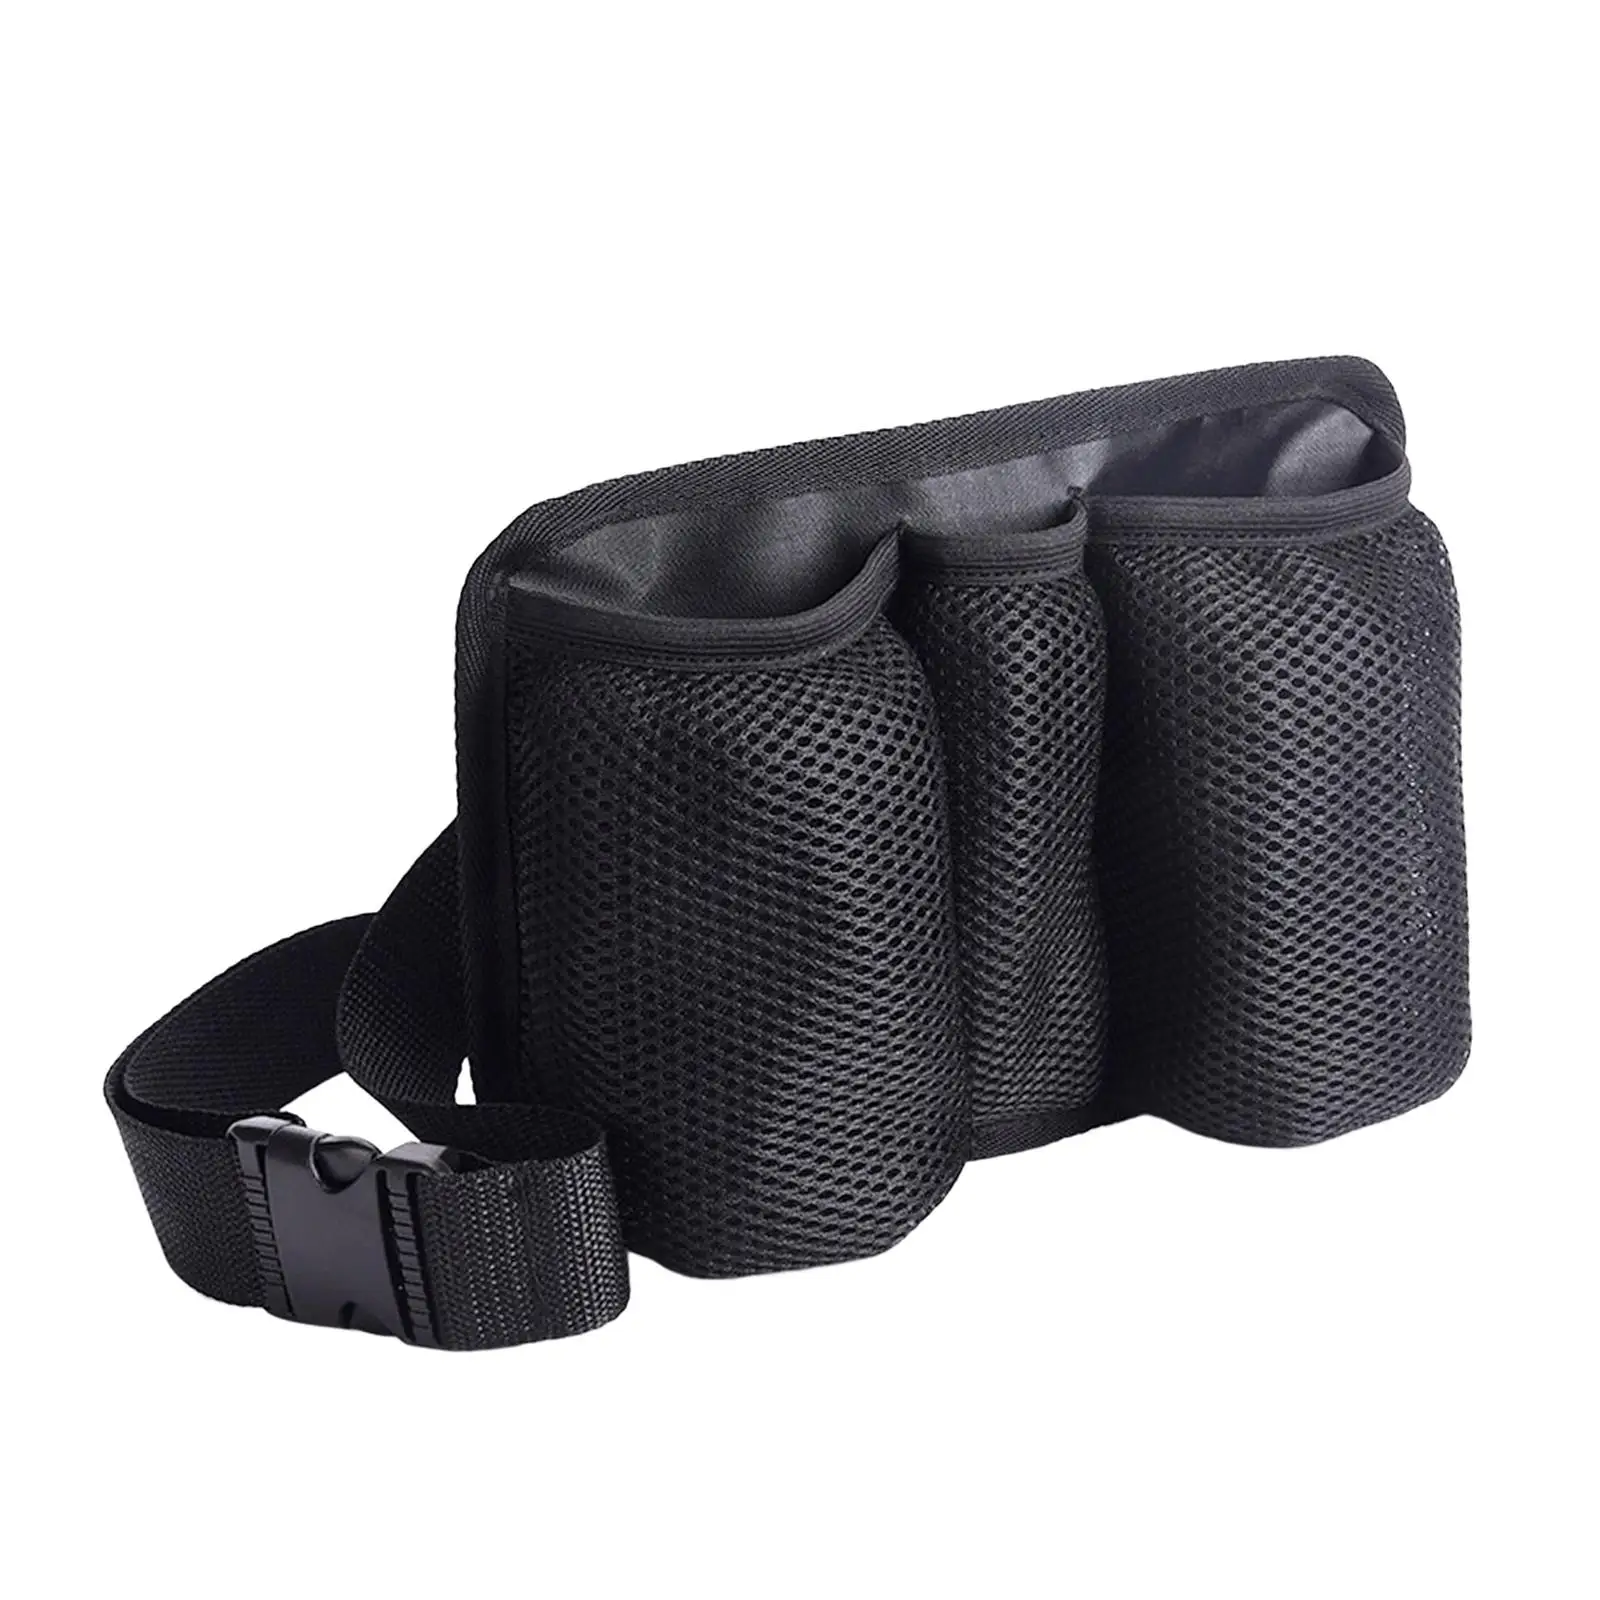 Multifunctional Tool Pouch Wrench Storage Case Adjustable Cleaning Tool Pocket Organizer Repair Waist for Waiter